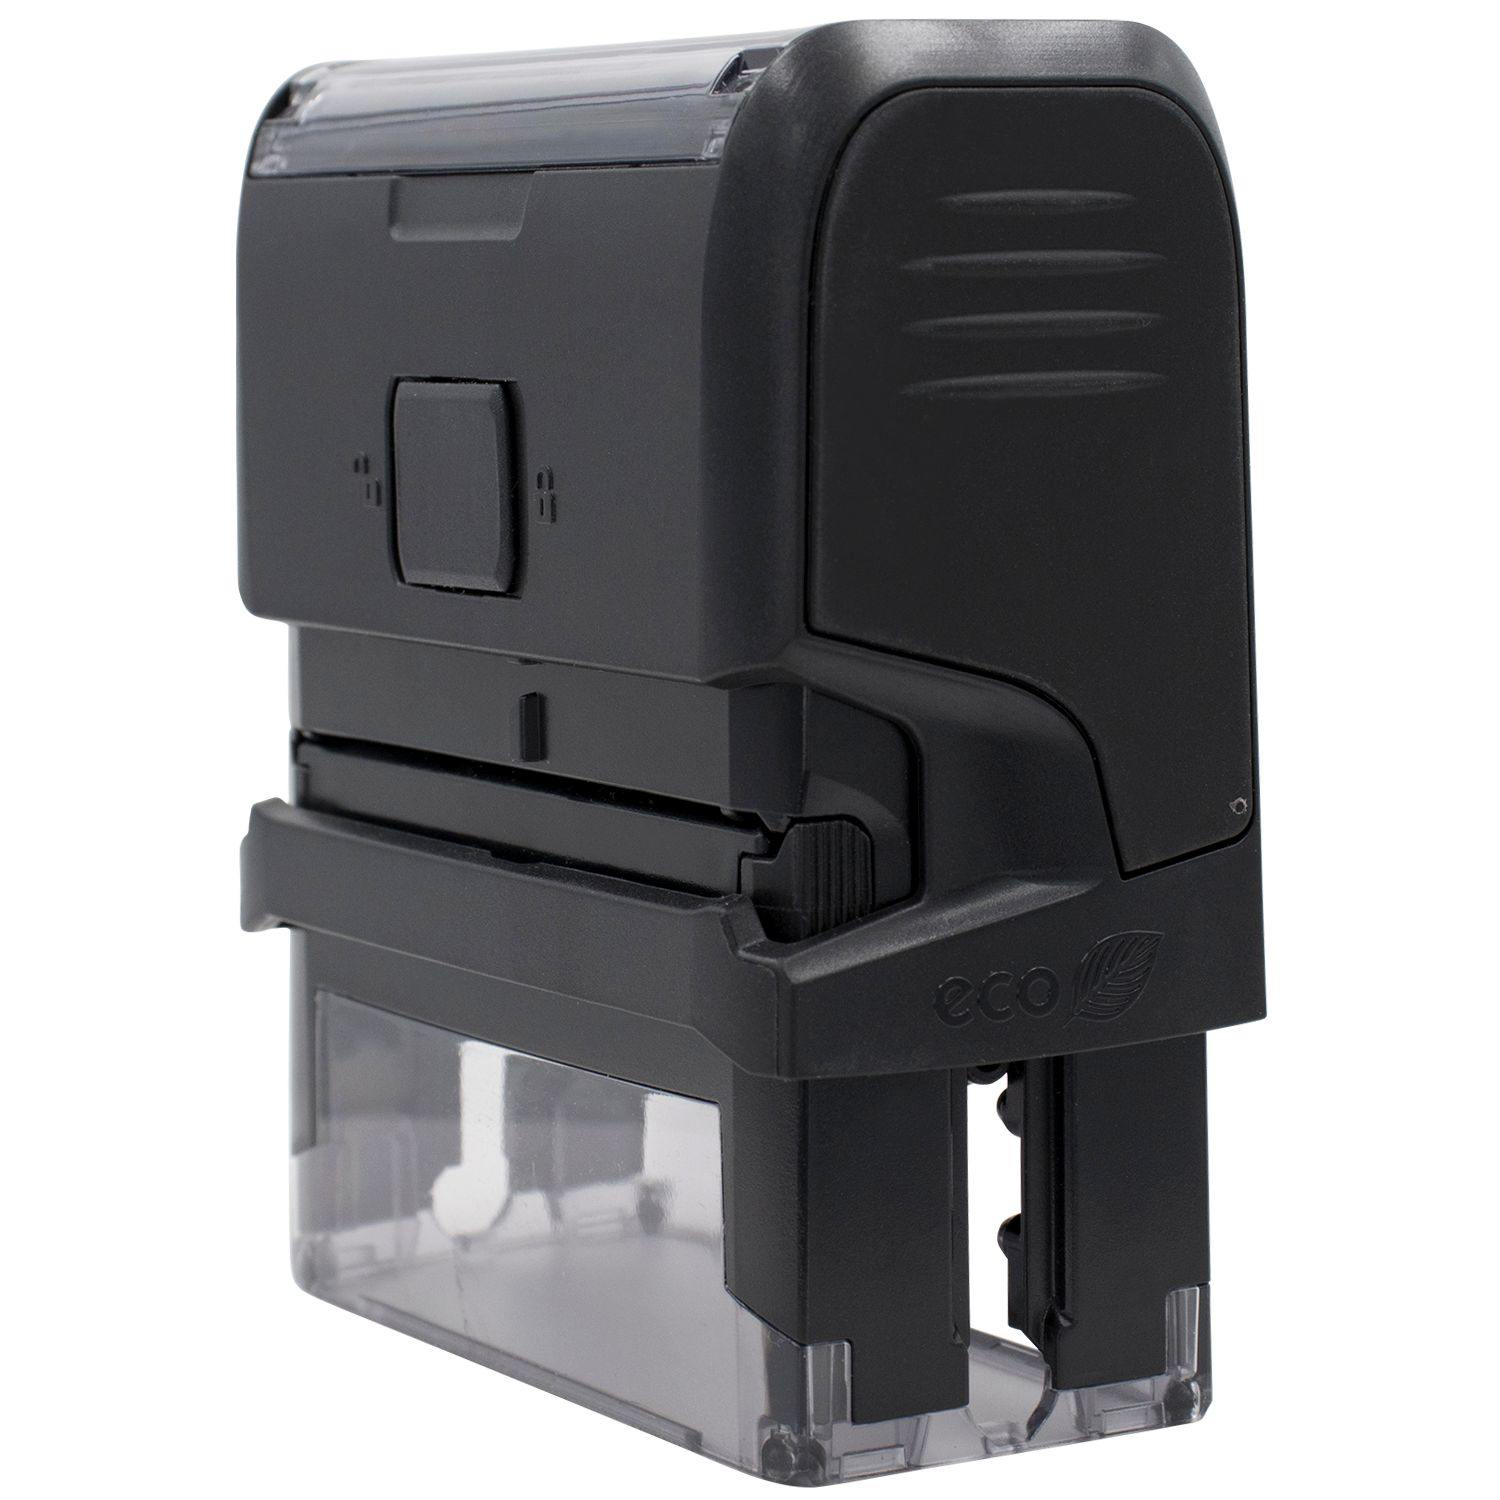 Self Inking Do Not Freeze Stamp - Engineer Seal Stamps - Brand_Trodat, Impression Size_Small, Stamp Type_Self-Inking Stamp, Type of Use_Medical Office